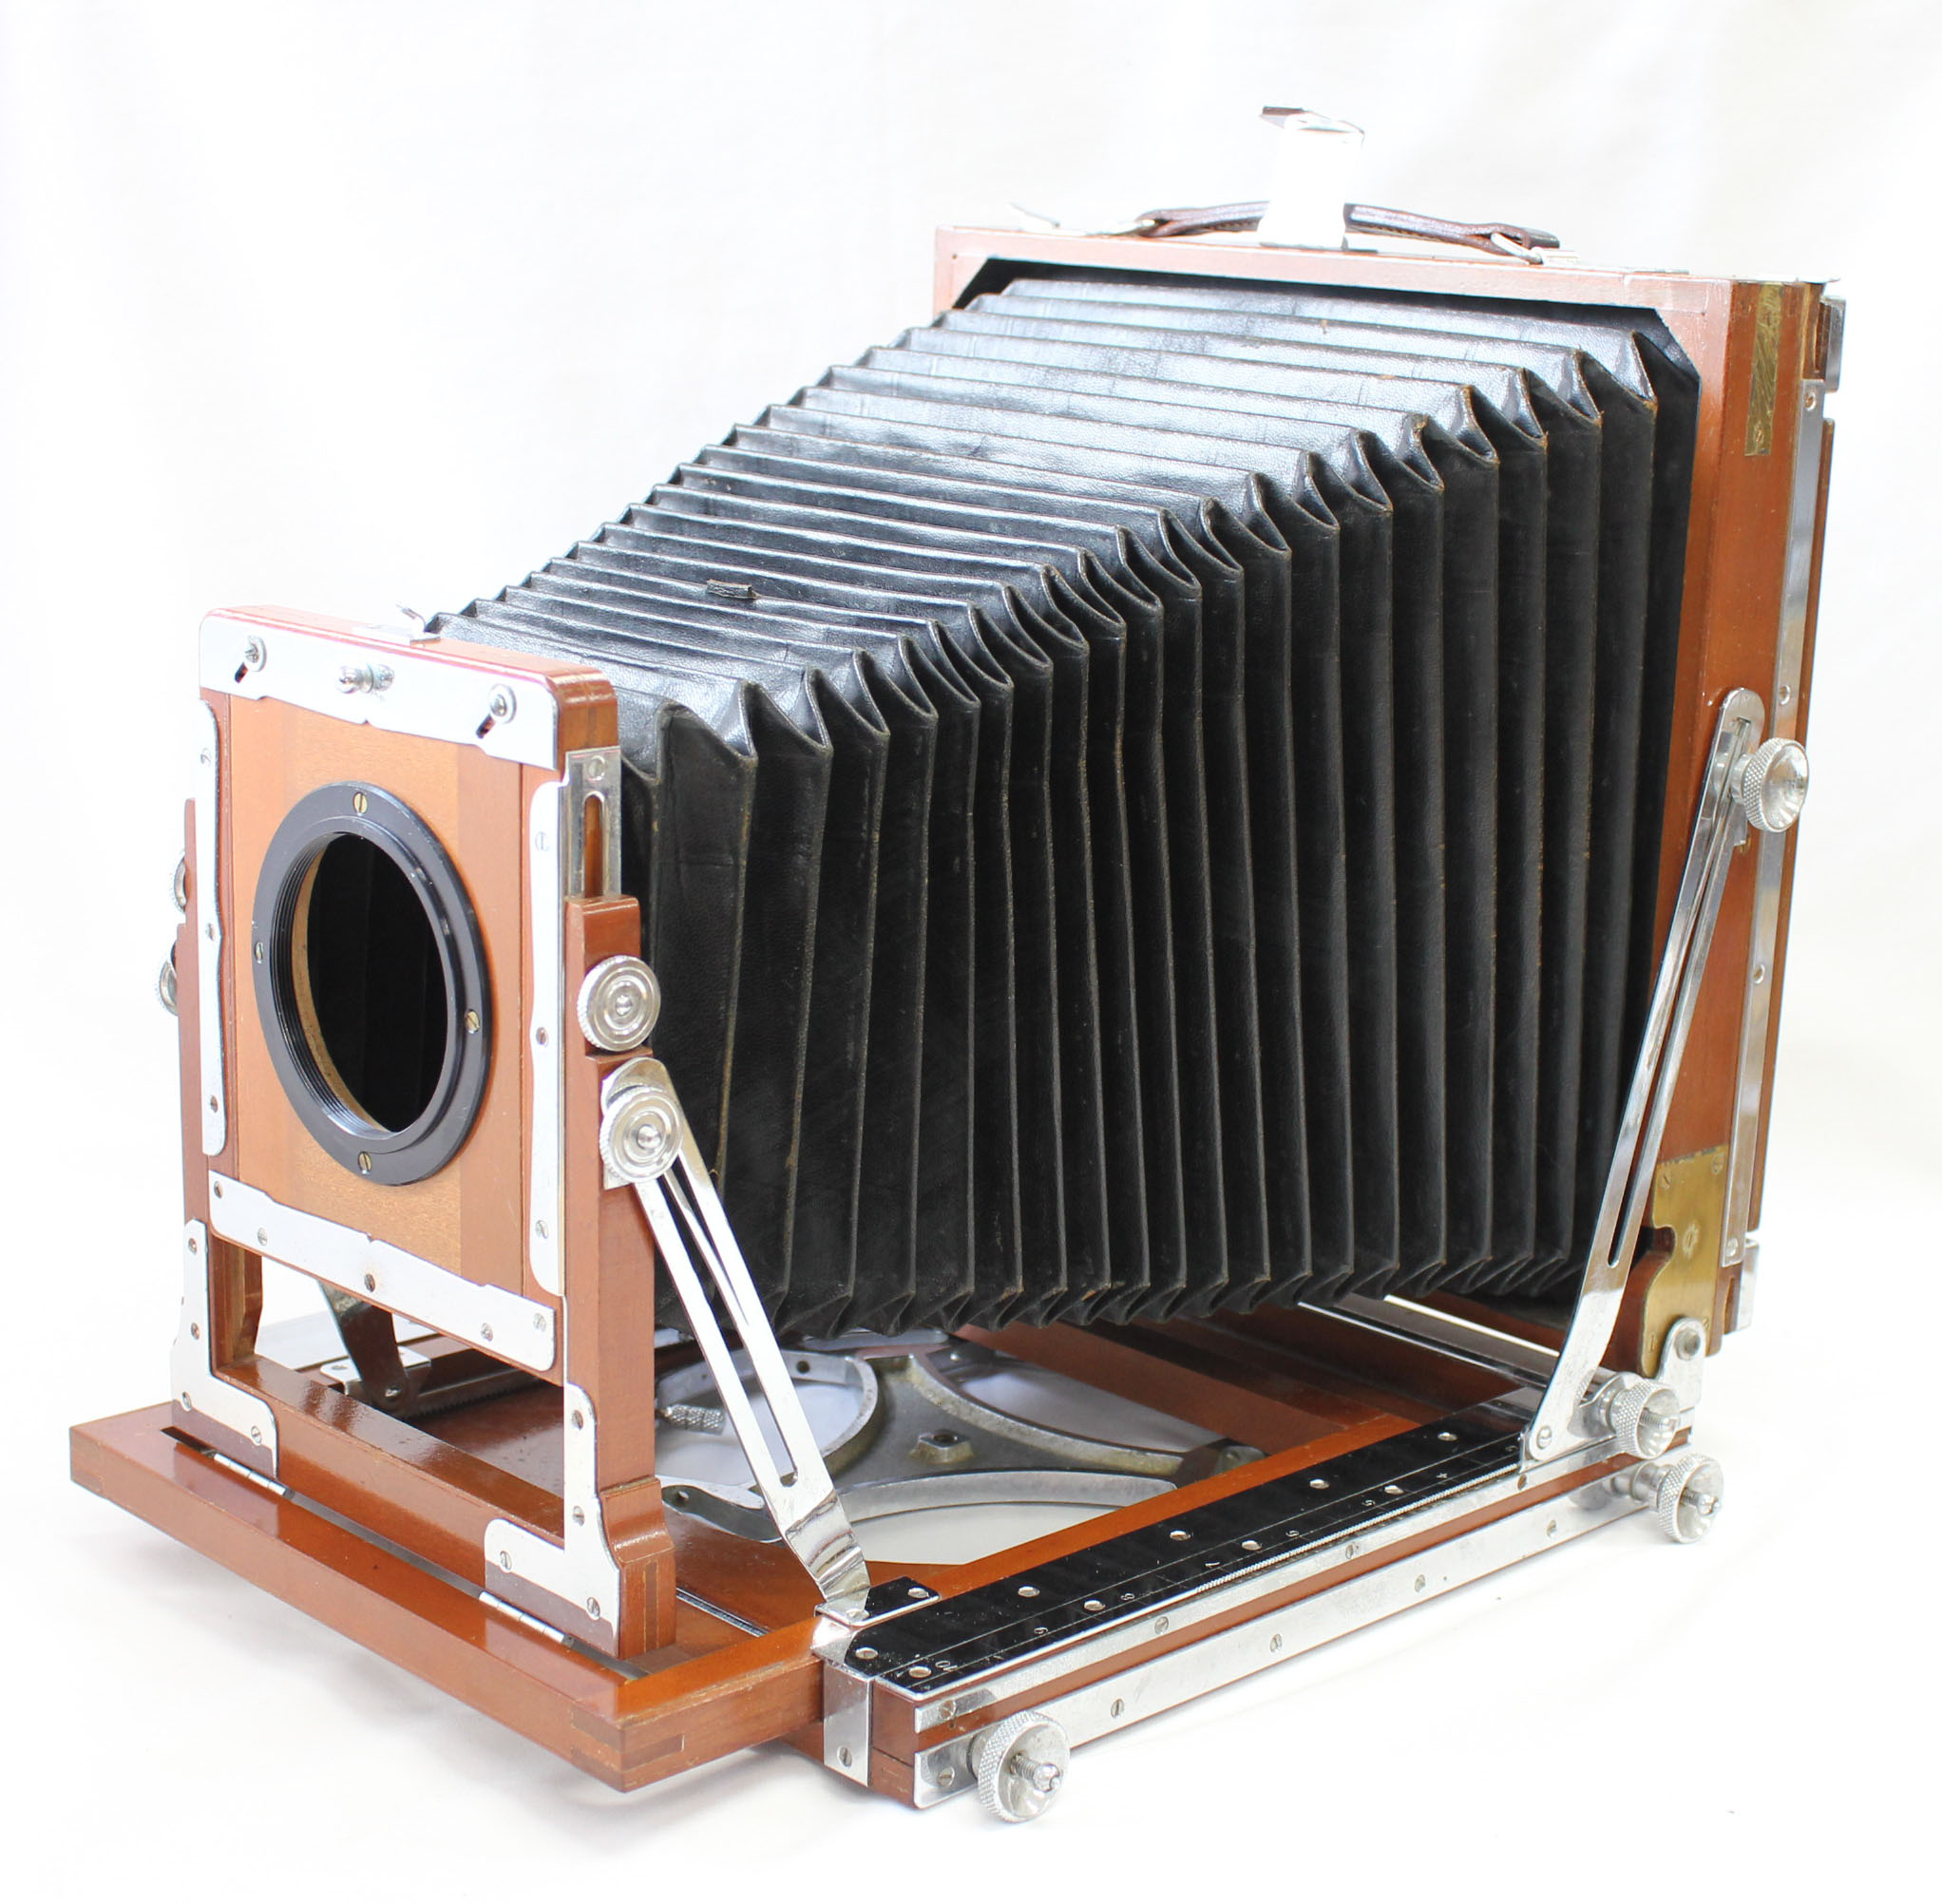  Tachihara Hope A STF 6 1/2x8 1/2 6.5x8.5inch 165x216mm Wood Field Camera with 8 Cut Film Holder from Japan Photo 1